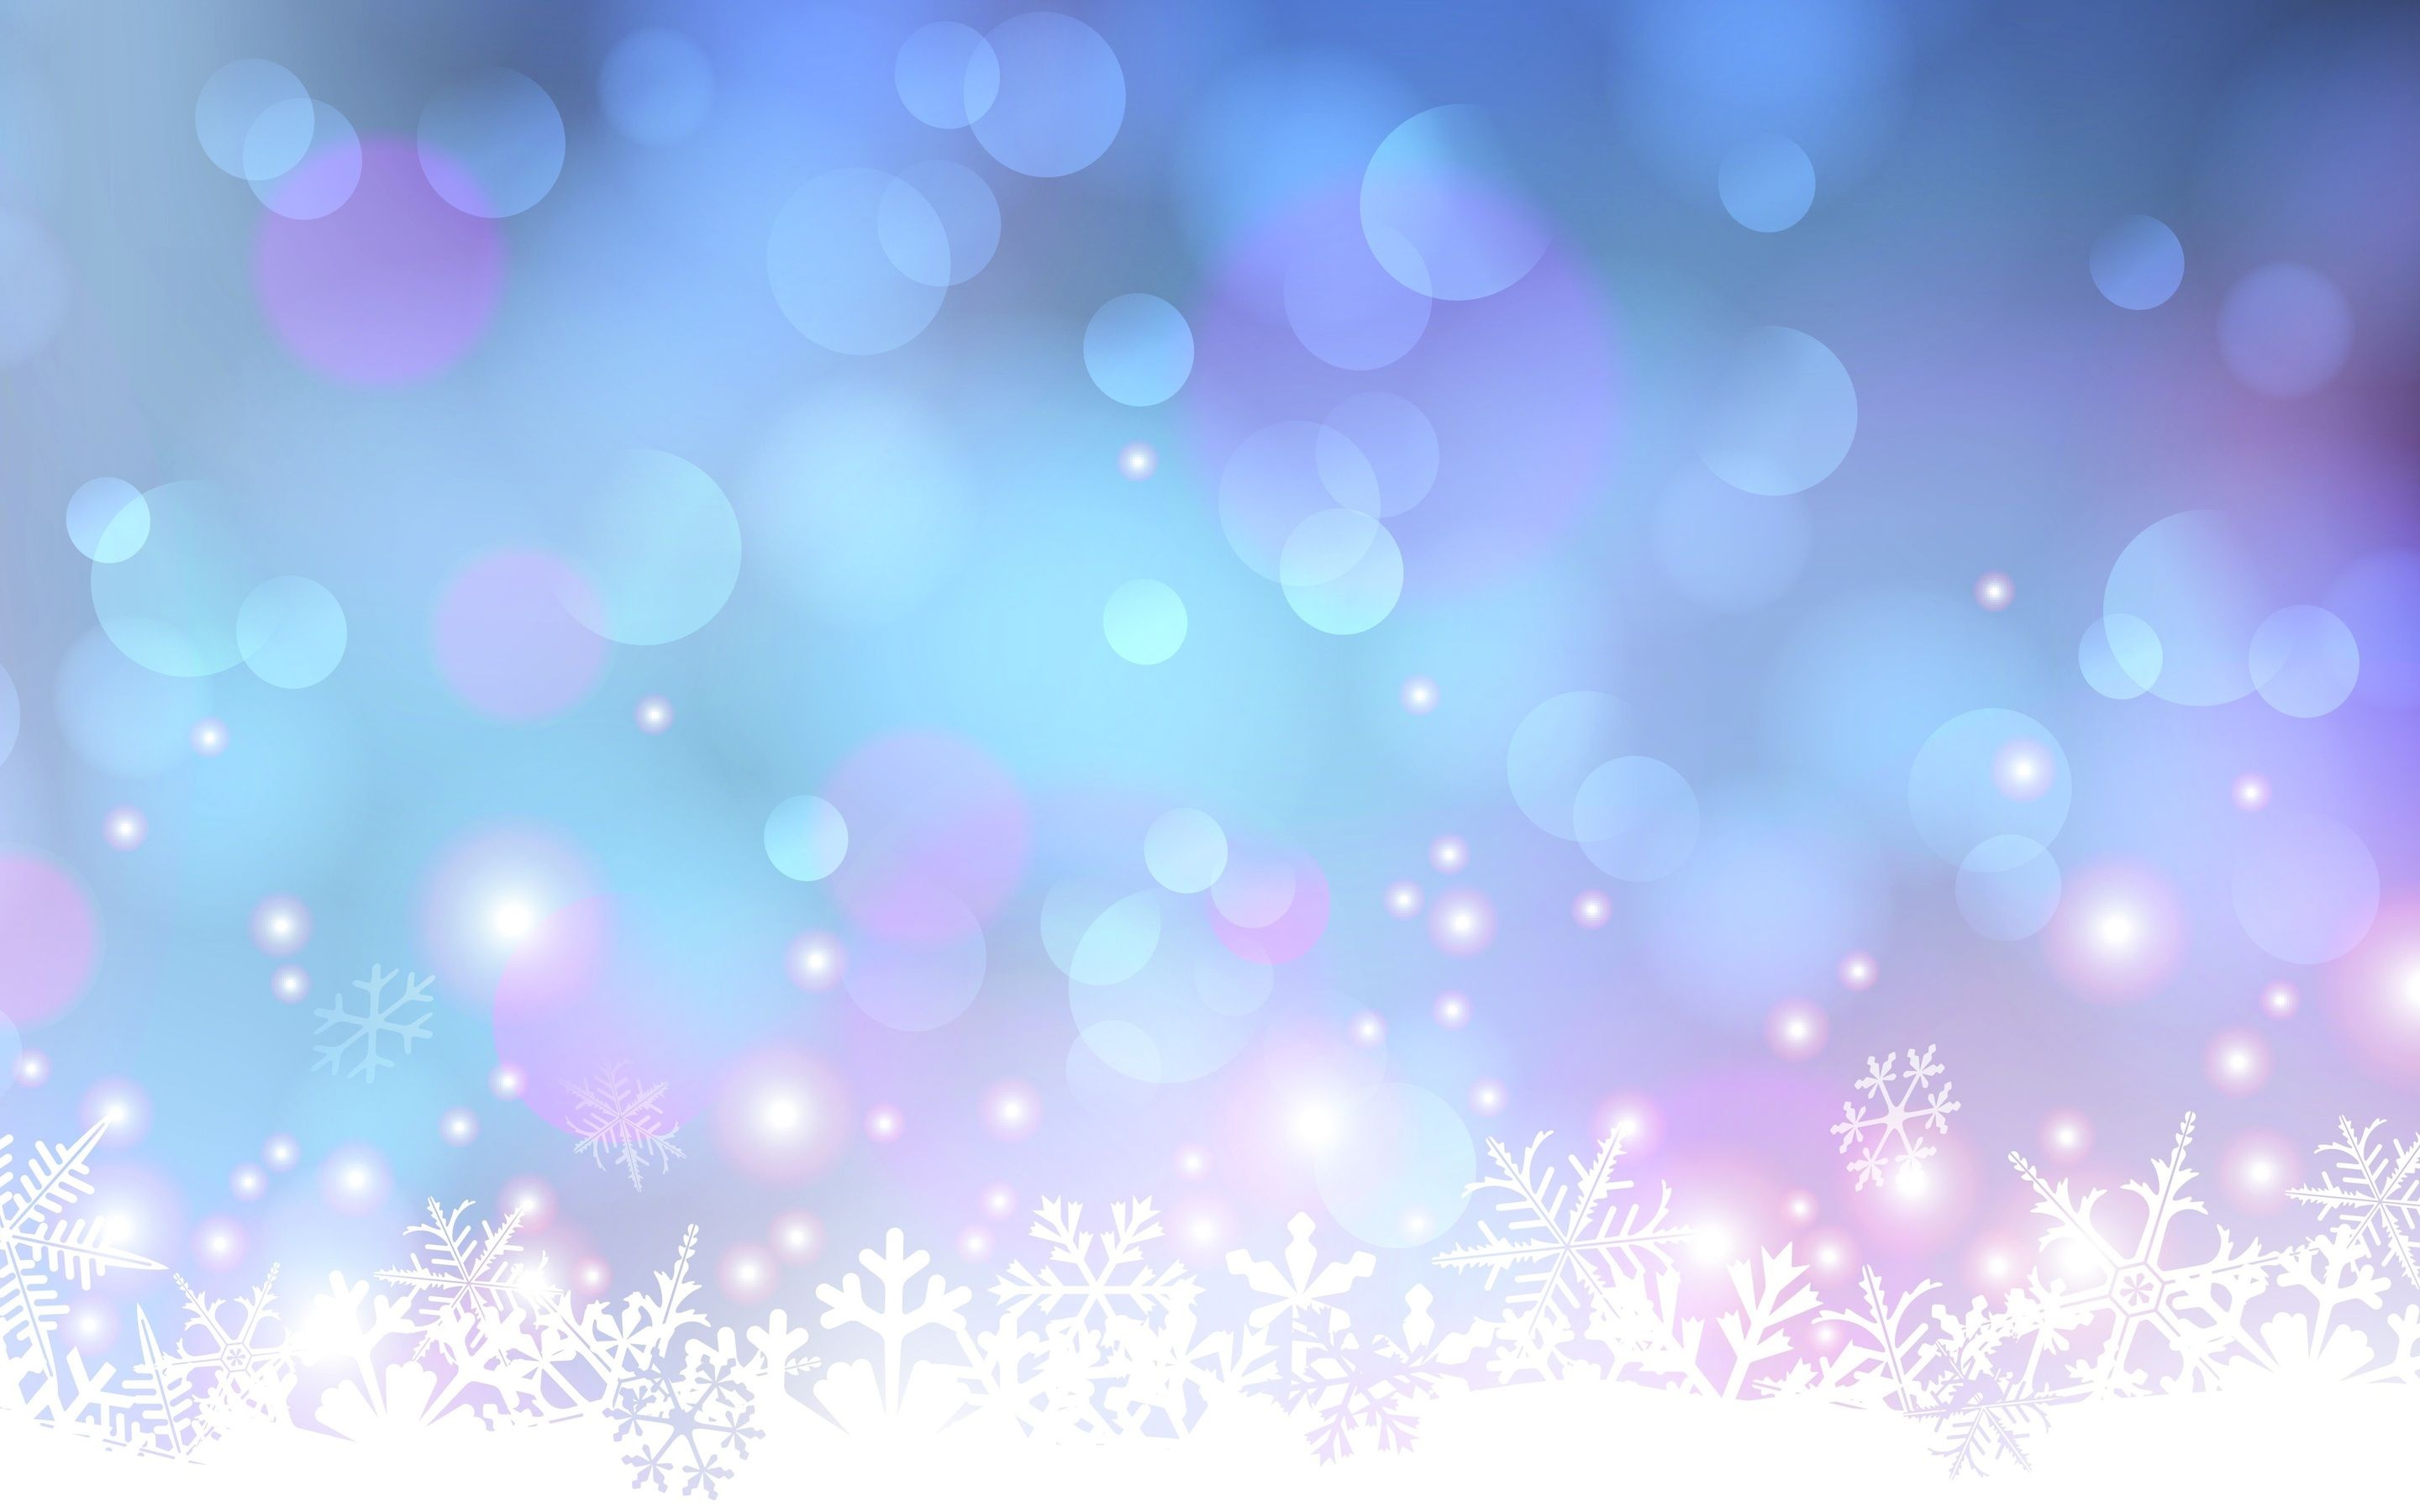 Christmas backgrounds - wallpapers, photos, pictures, images